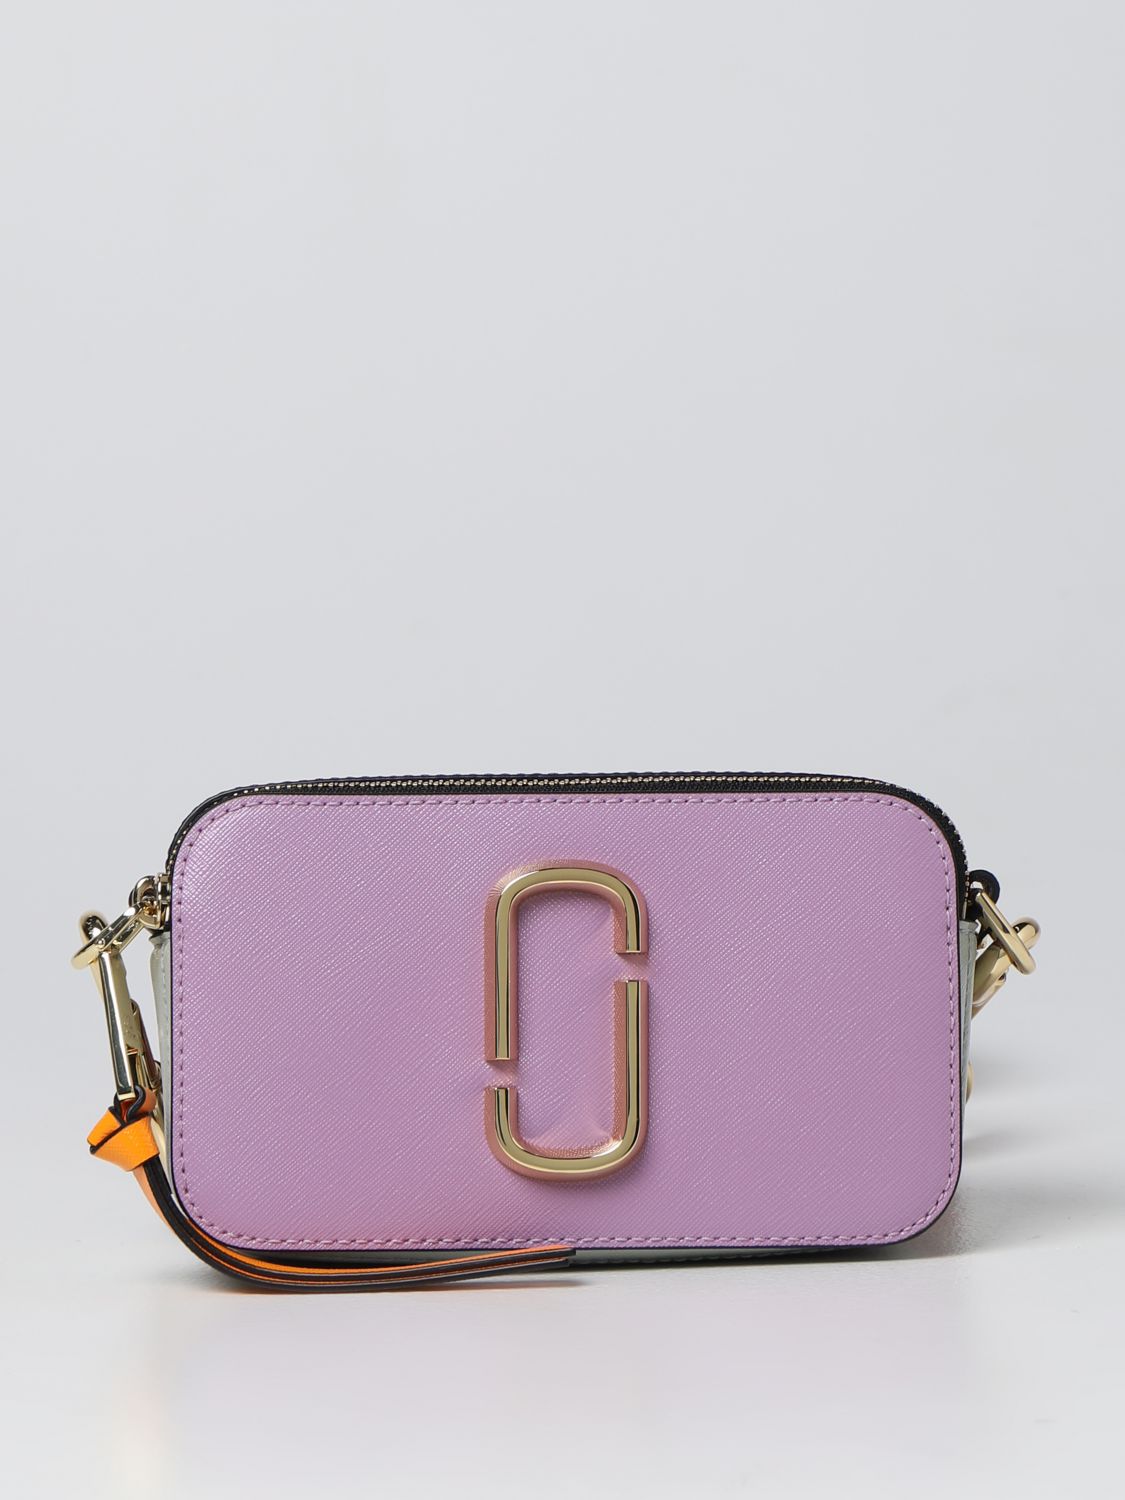 Marc by Marc Jacobs Leather Purple Clutch Purse  Marc jacobs leather,  Purple clutch, Marc jacobs clutch